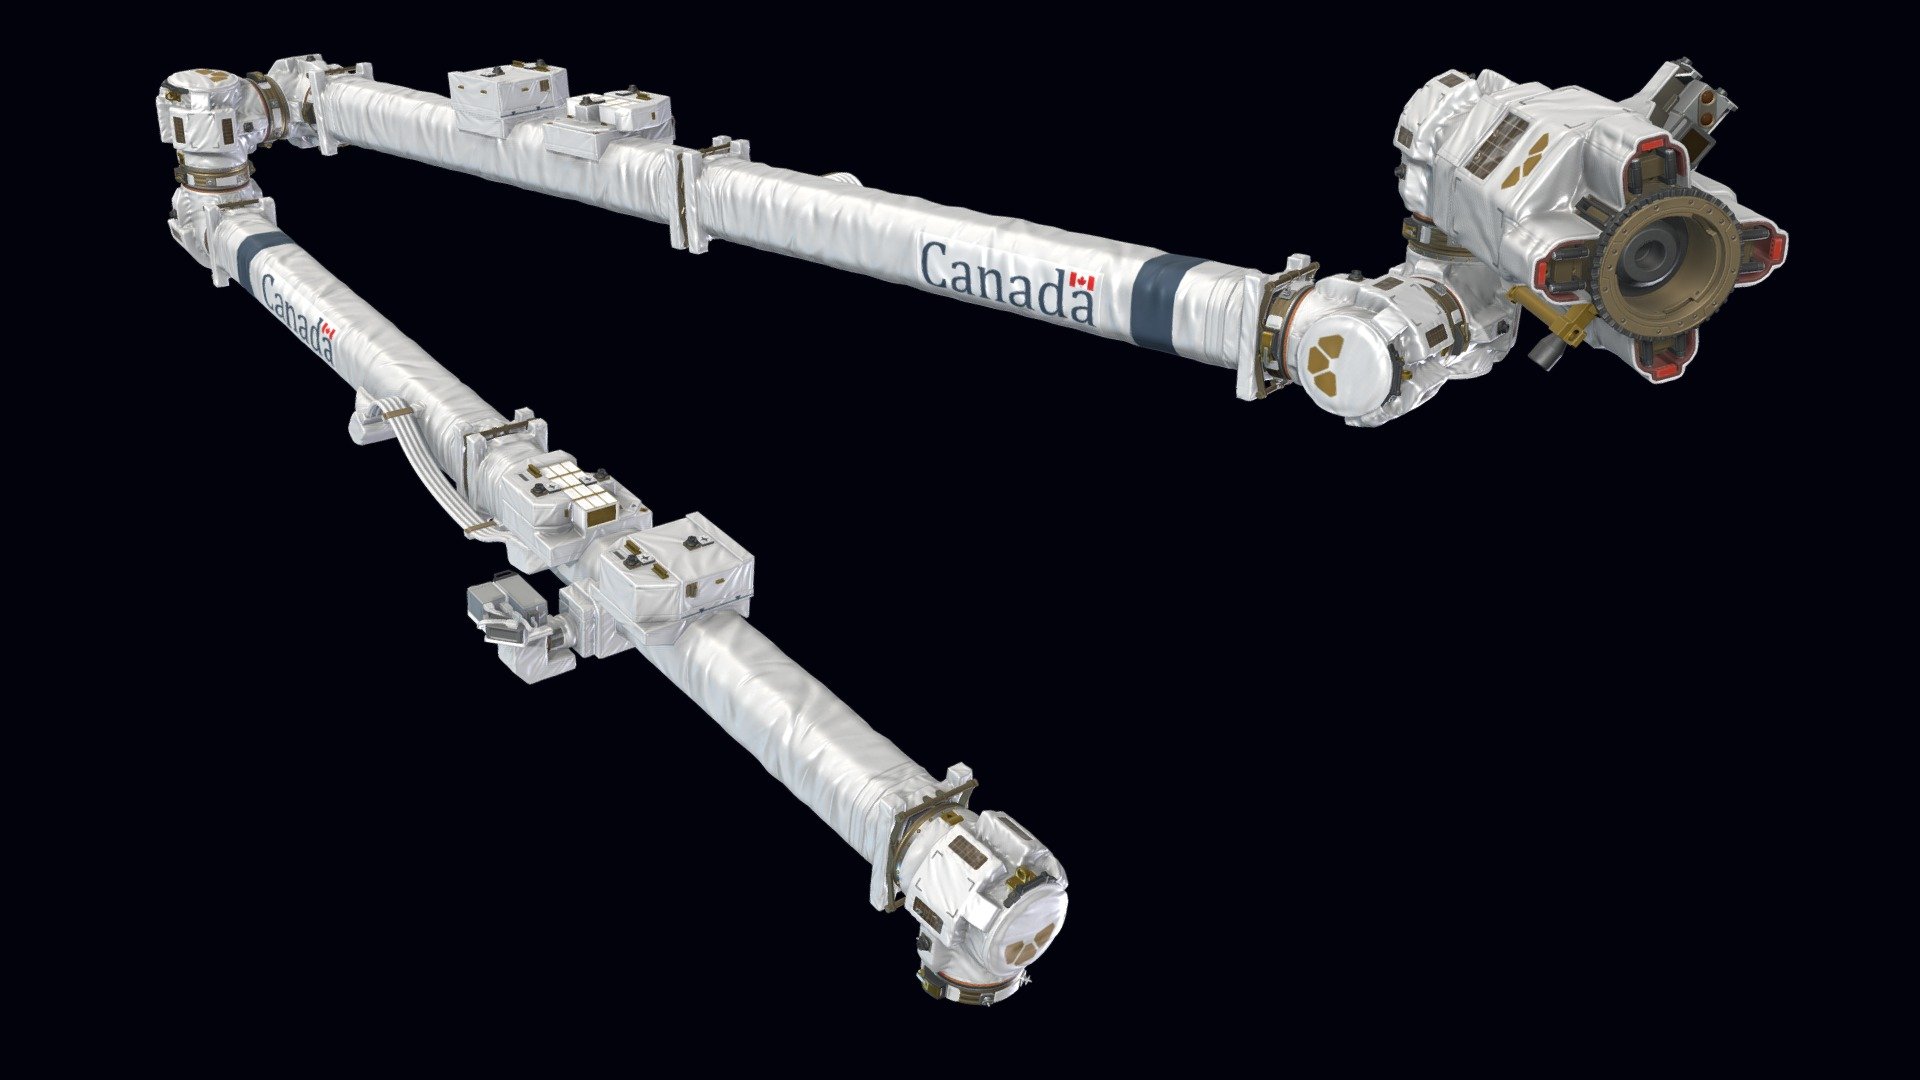 A Canadian-made robotic arm for the International Space Station, modeled based on real-world image references，but Inaccurate restoration of details.

https://www.artstation.com/artwork/r9mWWJ - ISS Robotic Arm - 3D model by Mike welson (@1010768895) 3d model